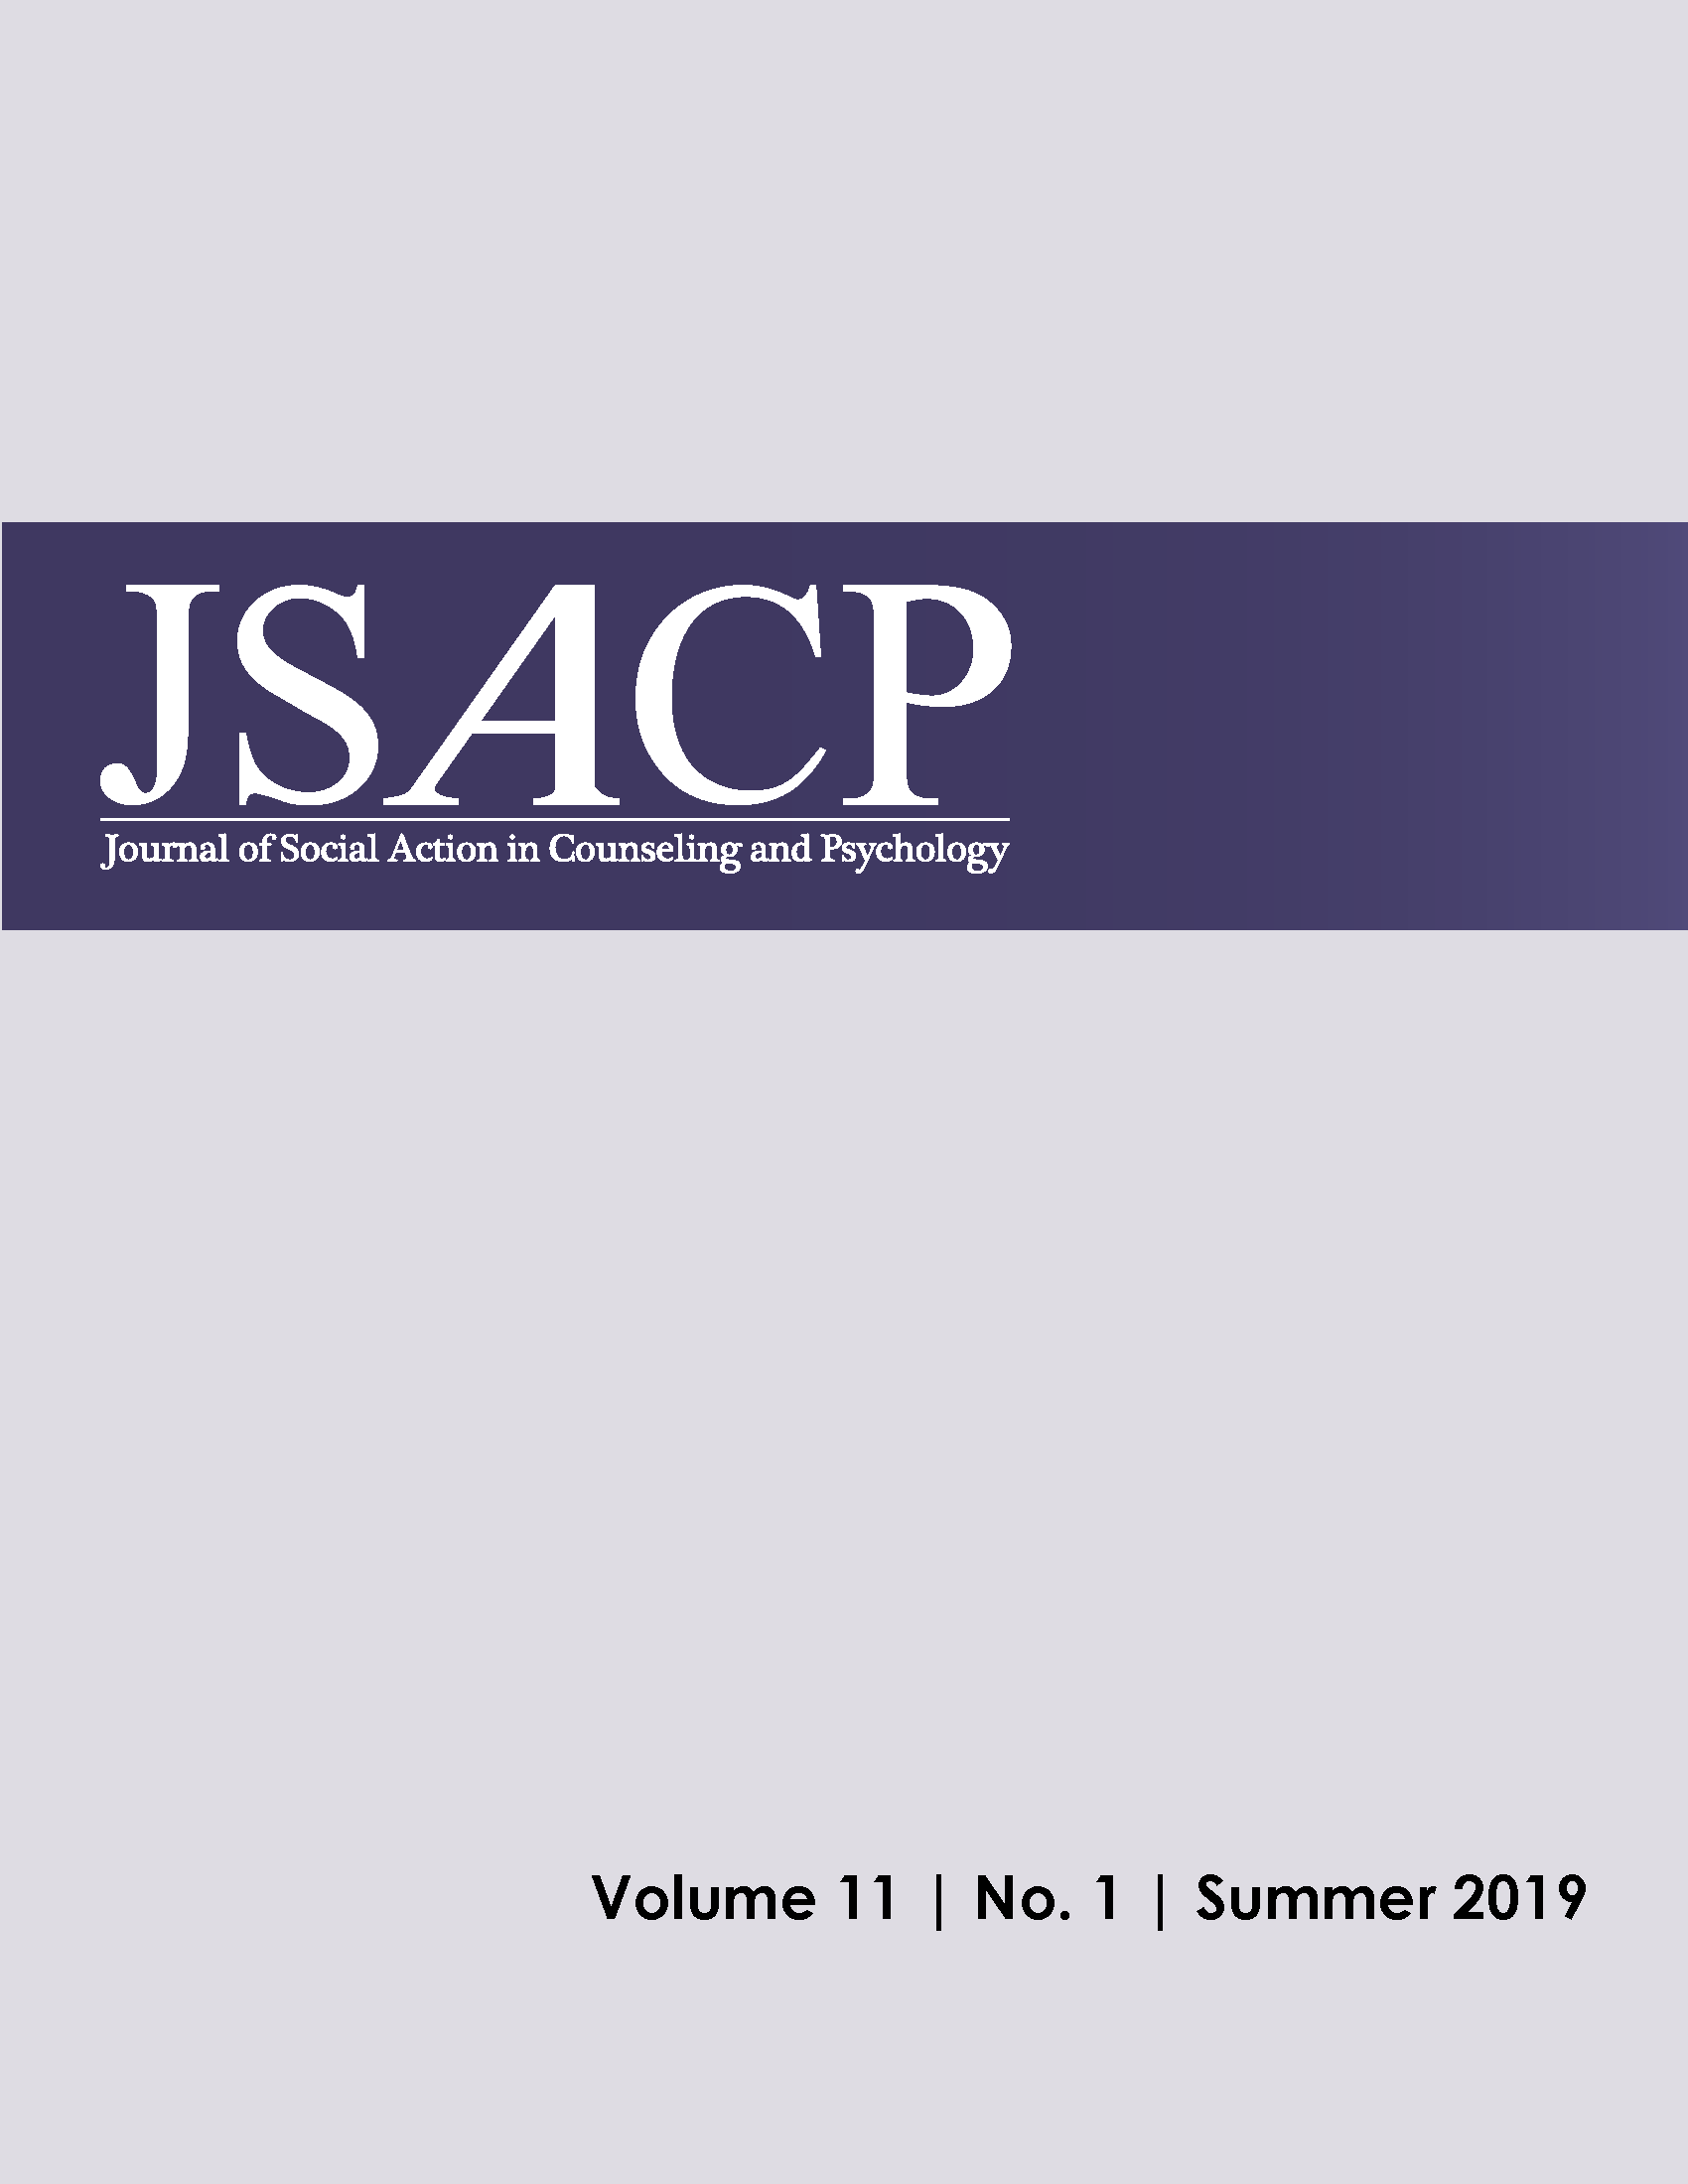 					View Vol. 11 No. 1 (2019): Journal for Social Action in Counseling and Psychology, Summer 2019
				